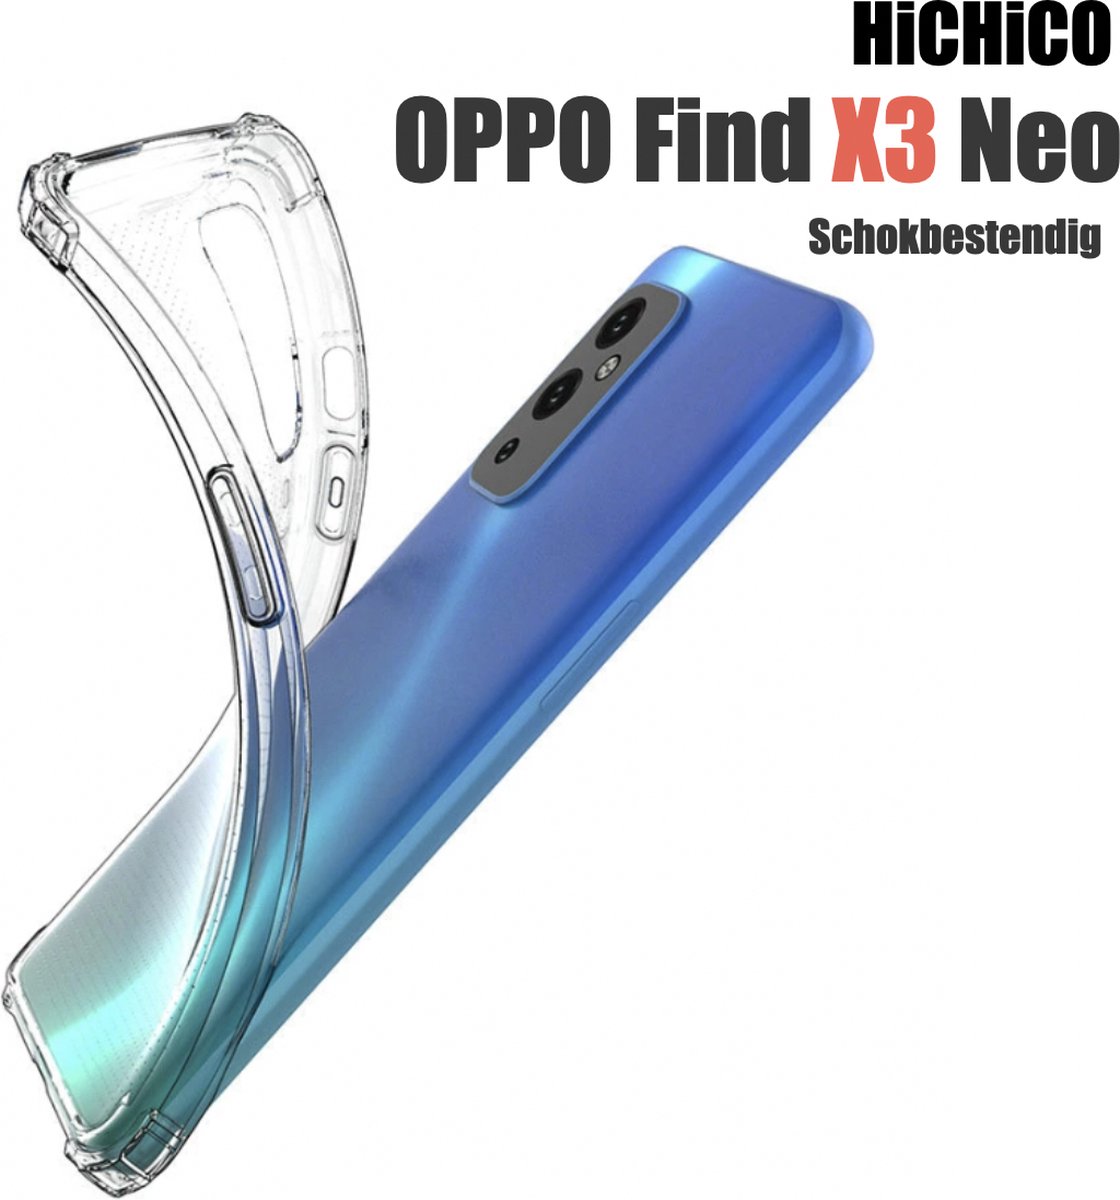 OPPO Find X3 Neo hoesje - OPPO Find X3 Neo hoesje shock proof case transparant hoesjes cover hoes - Clear Backcover OPPO Find X3 Neo hoesje - HiCHiCO